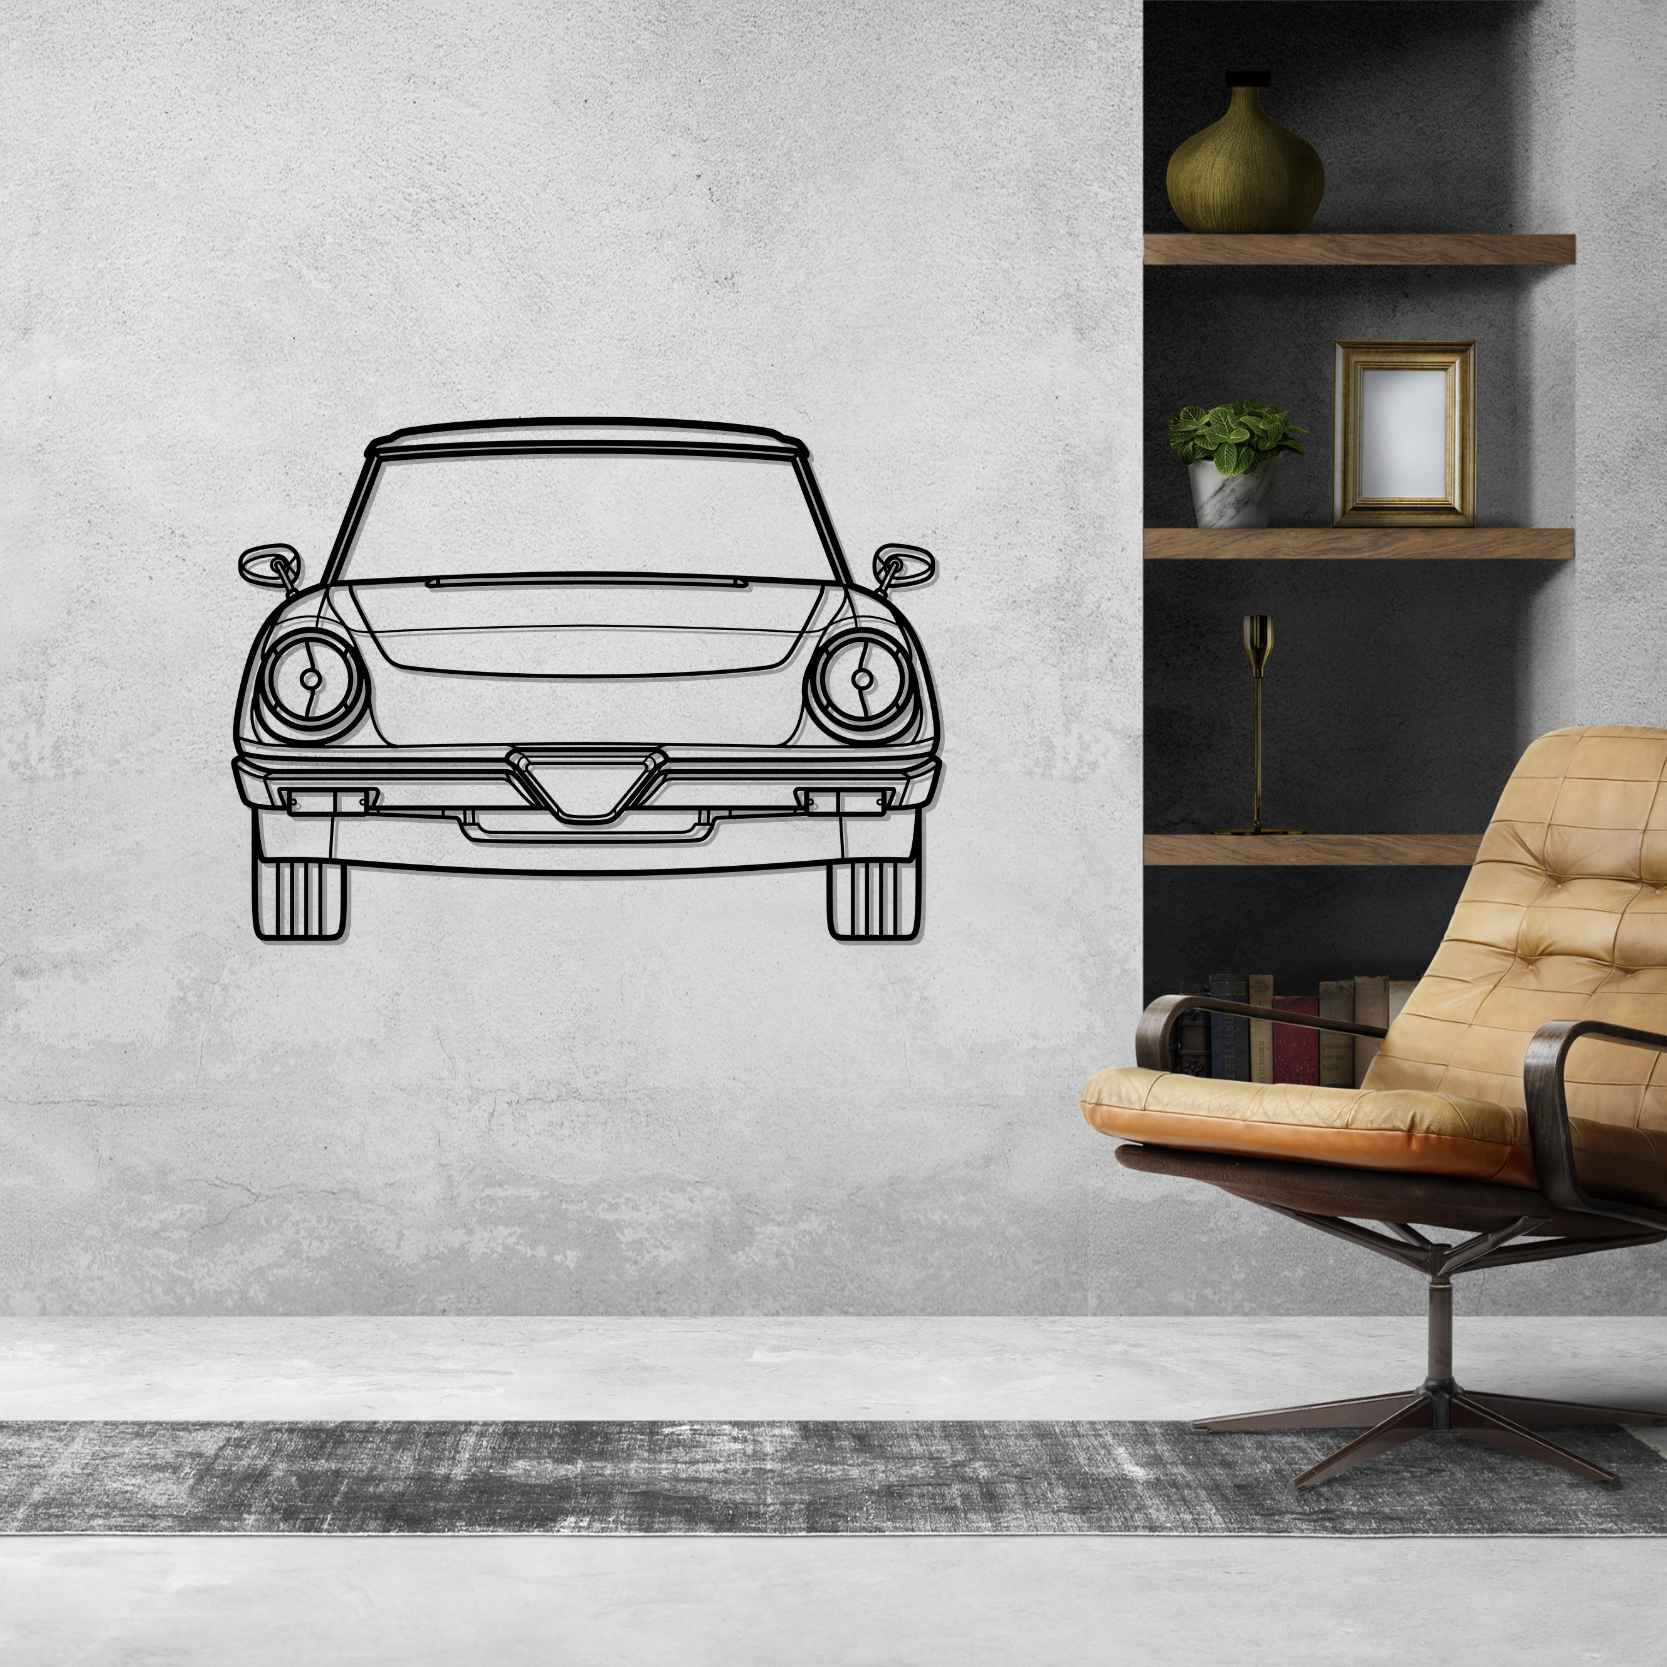 Spider 1984 Front Silhouette Metal Wall Art, Custom Metal Sport Car Silhouette Wall Art - Garage Wall Decor Gift For Him